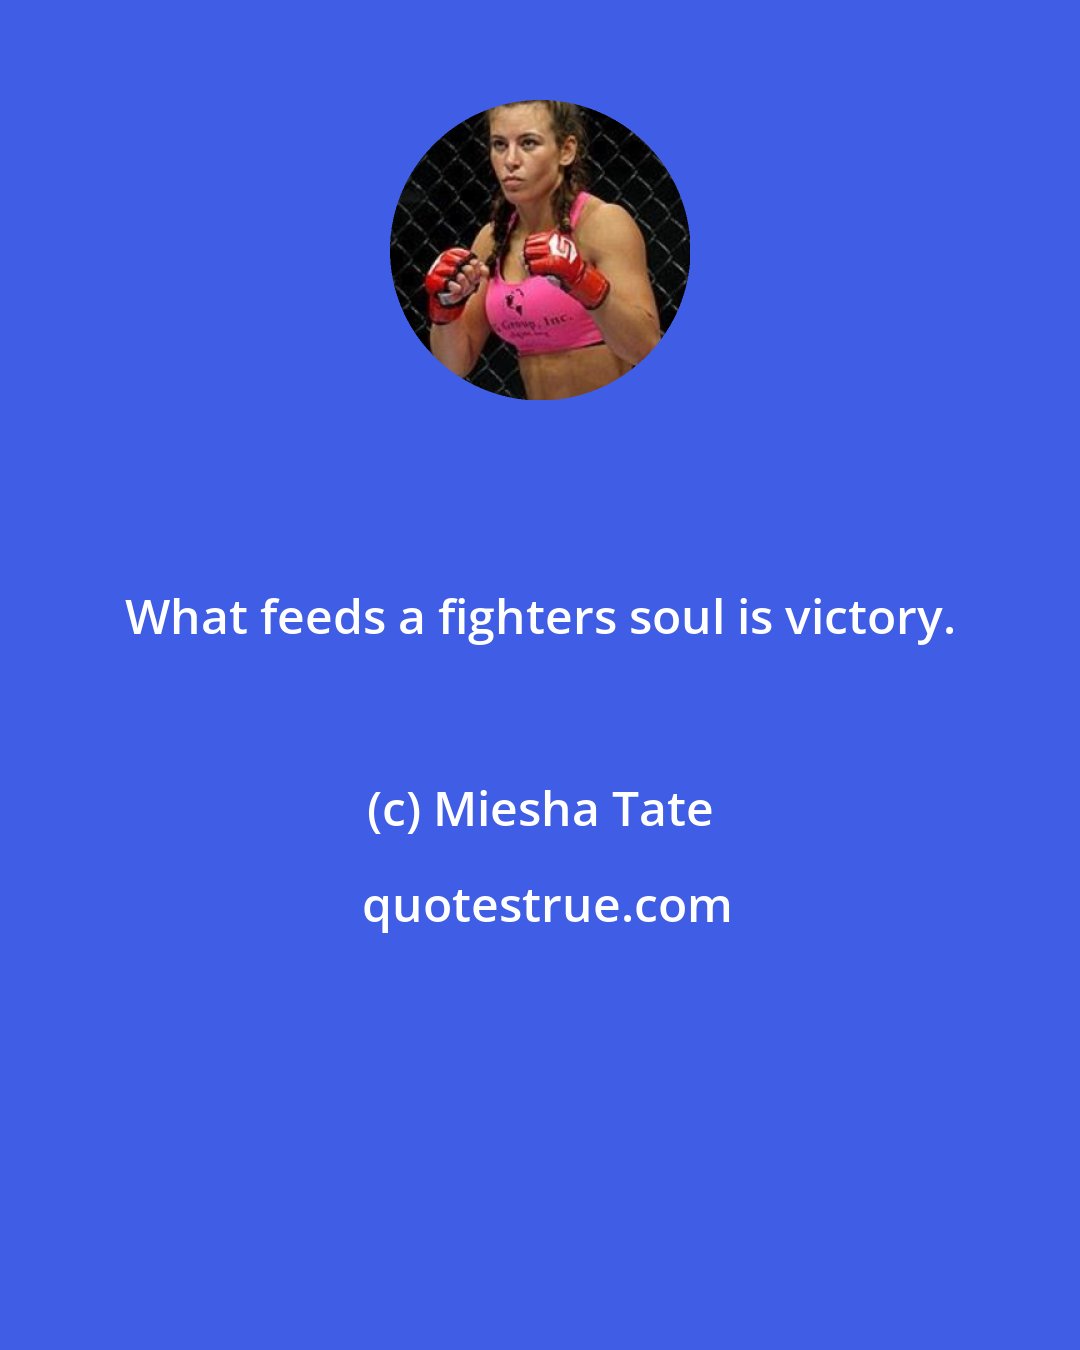 Miesha Tate: What feeds a fighters soul is victory.